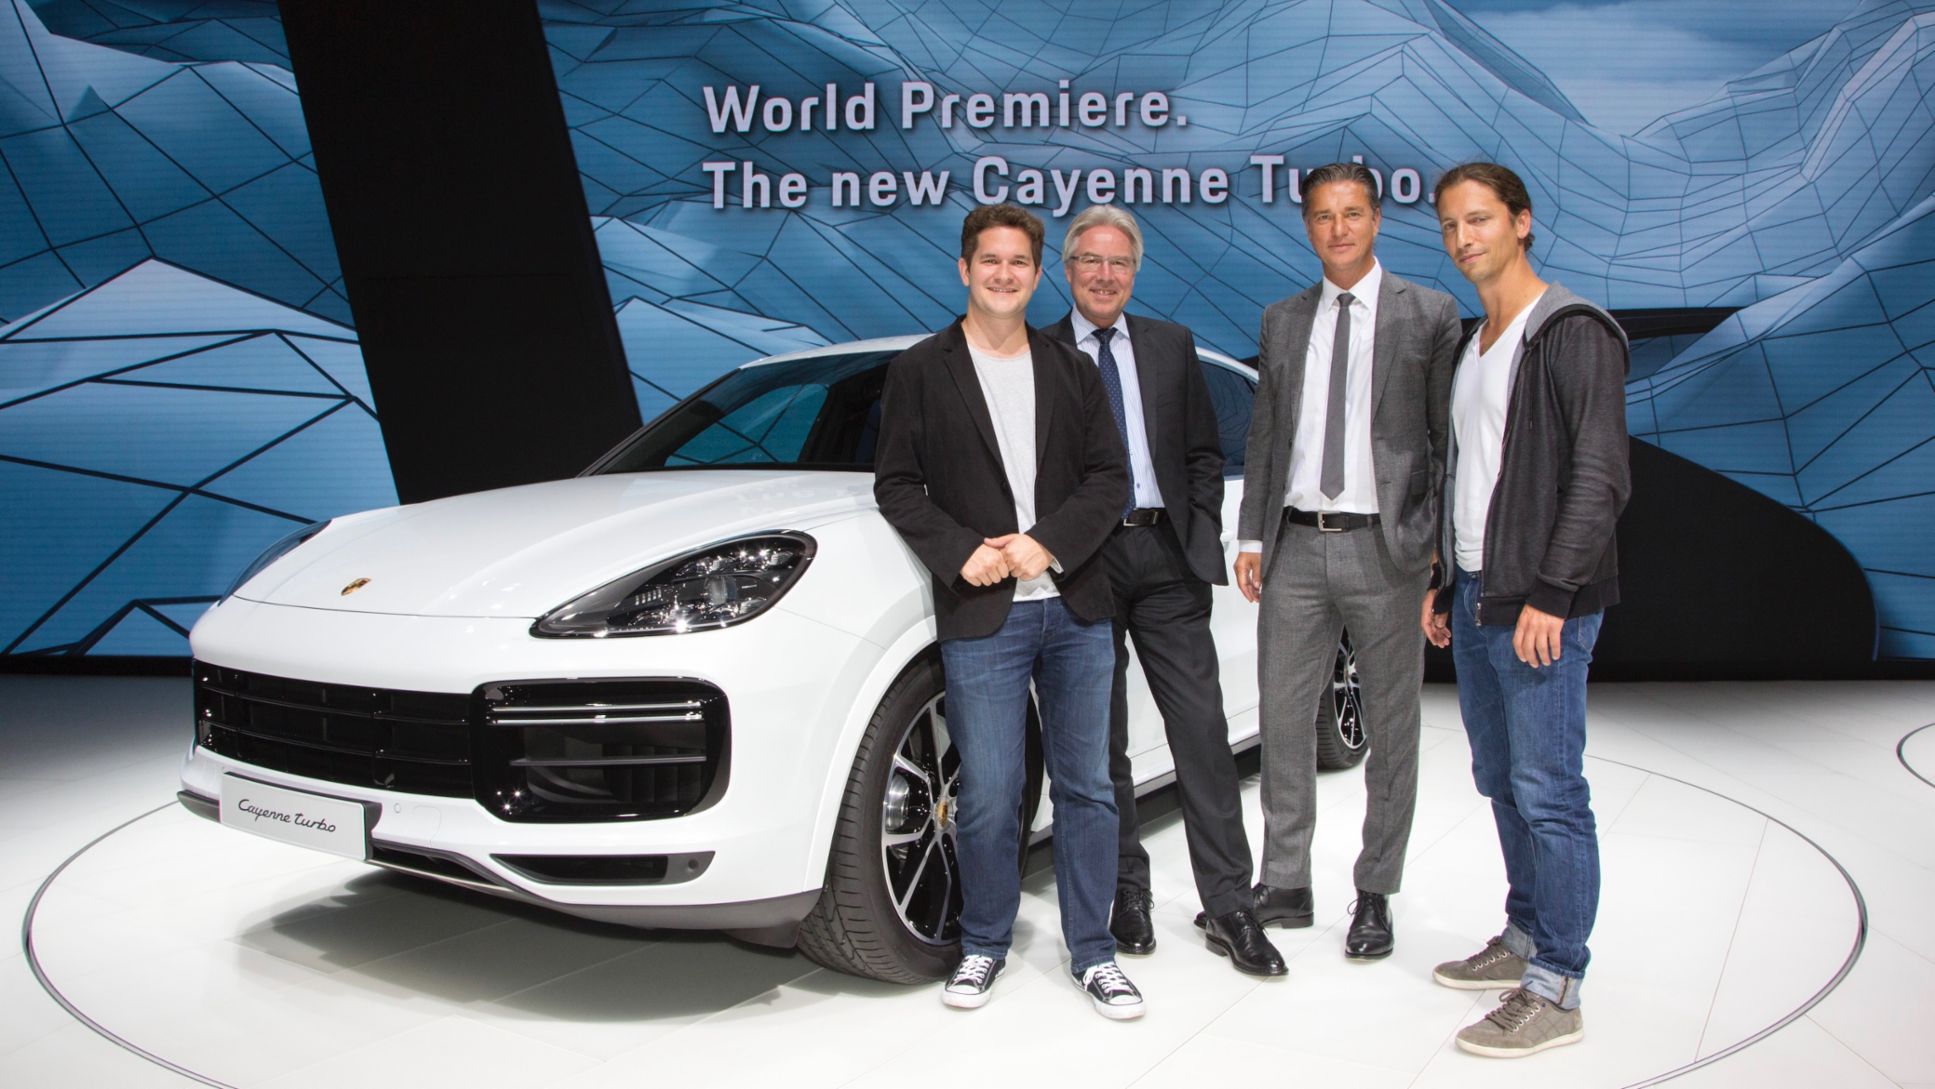 Thomas Bachem, Chancellor of CODE University, Andreas Haffner, Member of the Executive Board, Human Resources and Social Affairs at Porsche, Lutz Meschke, Vice President and Member of the Executive Board, Finance and IT at Porsche, Manuel Dolderer, President of CODE University, l-r, Cayenne Turbo, 2017, Porsche AG